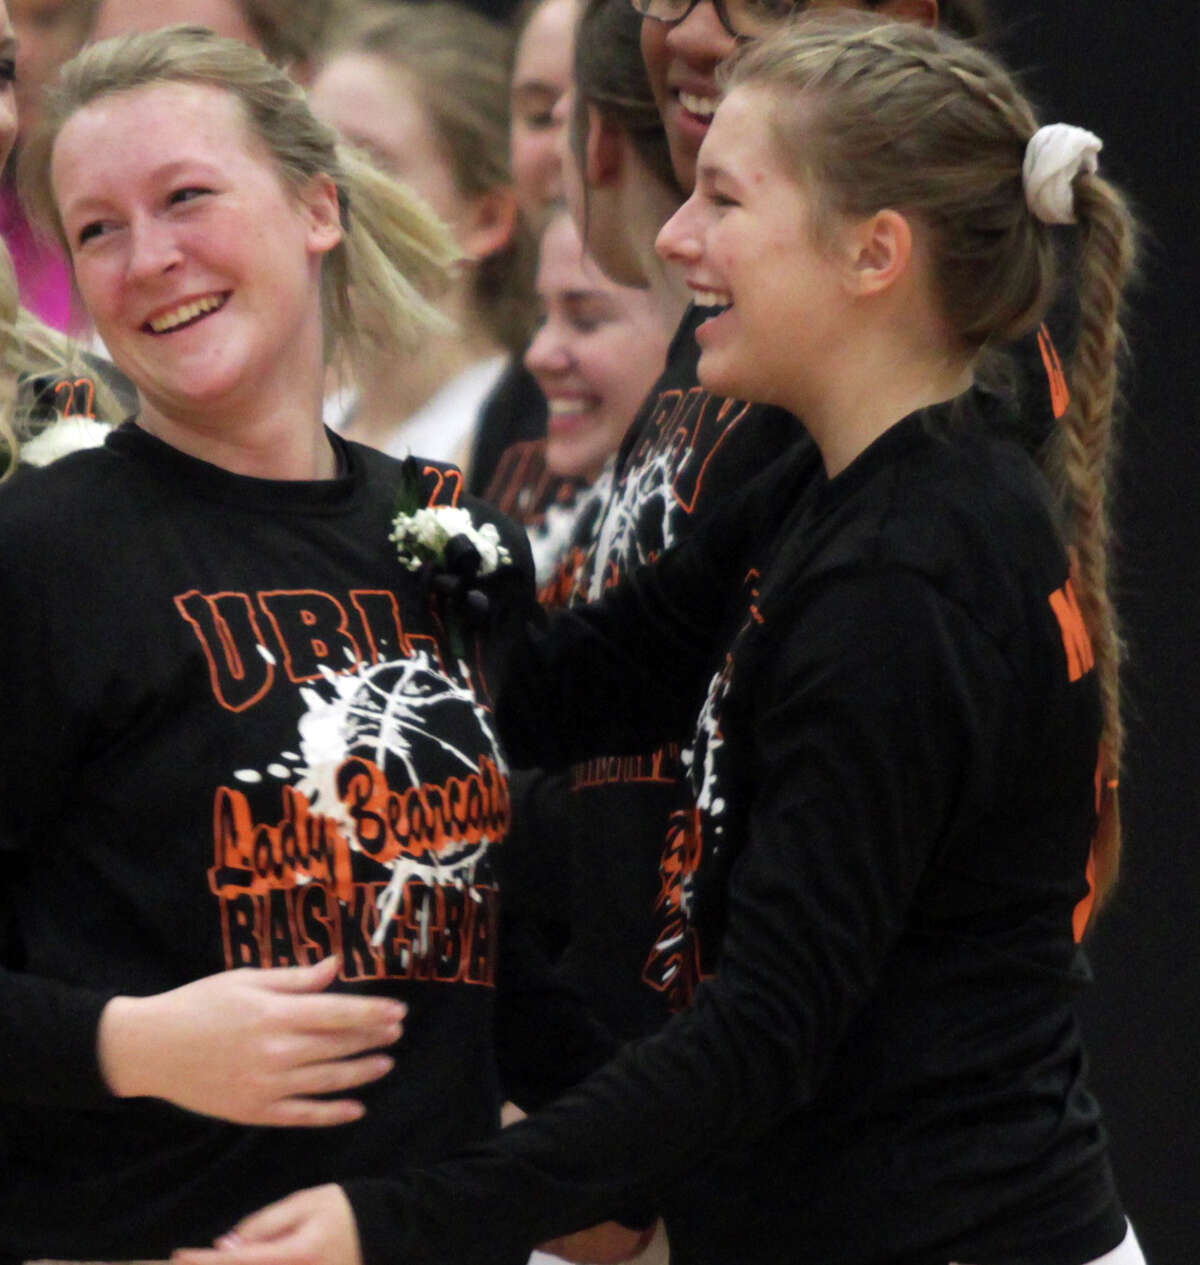 The Ubly girls basketball team claimed an outright league championship with a 50-24 victory over Brown City on Thursday, Feb. 20.